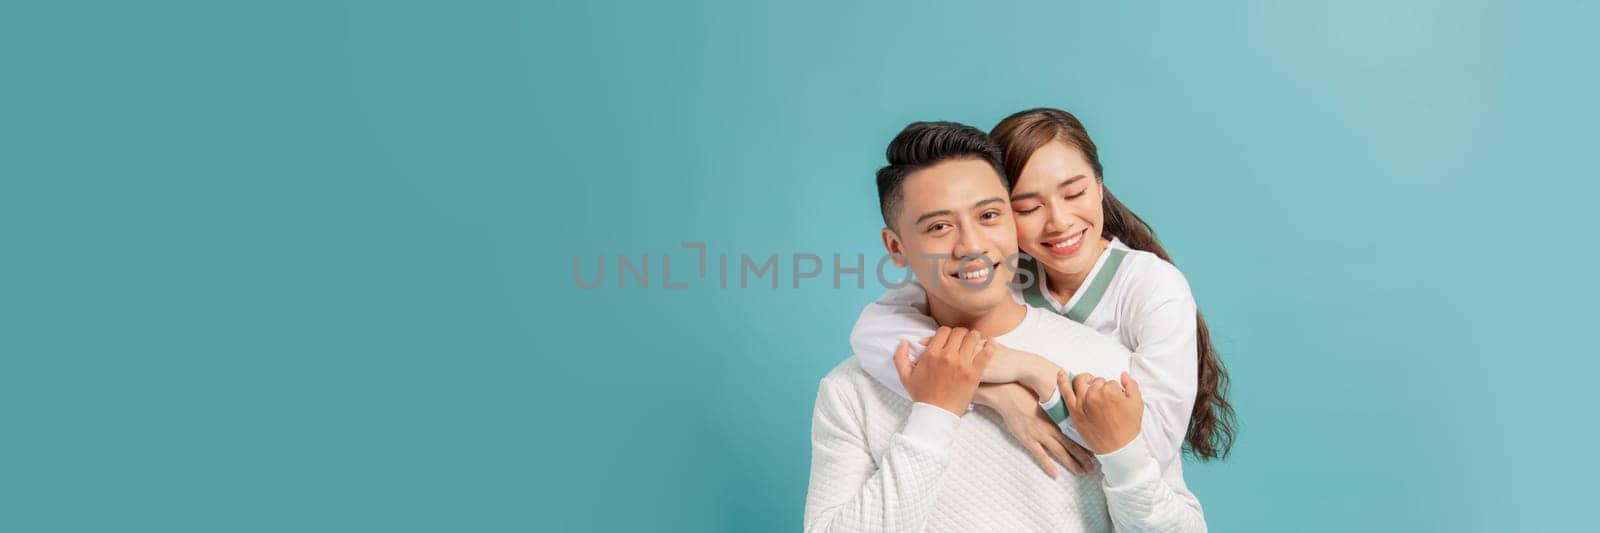 Attractive couple embracing and smiling on turquoise background